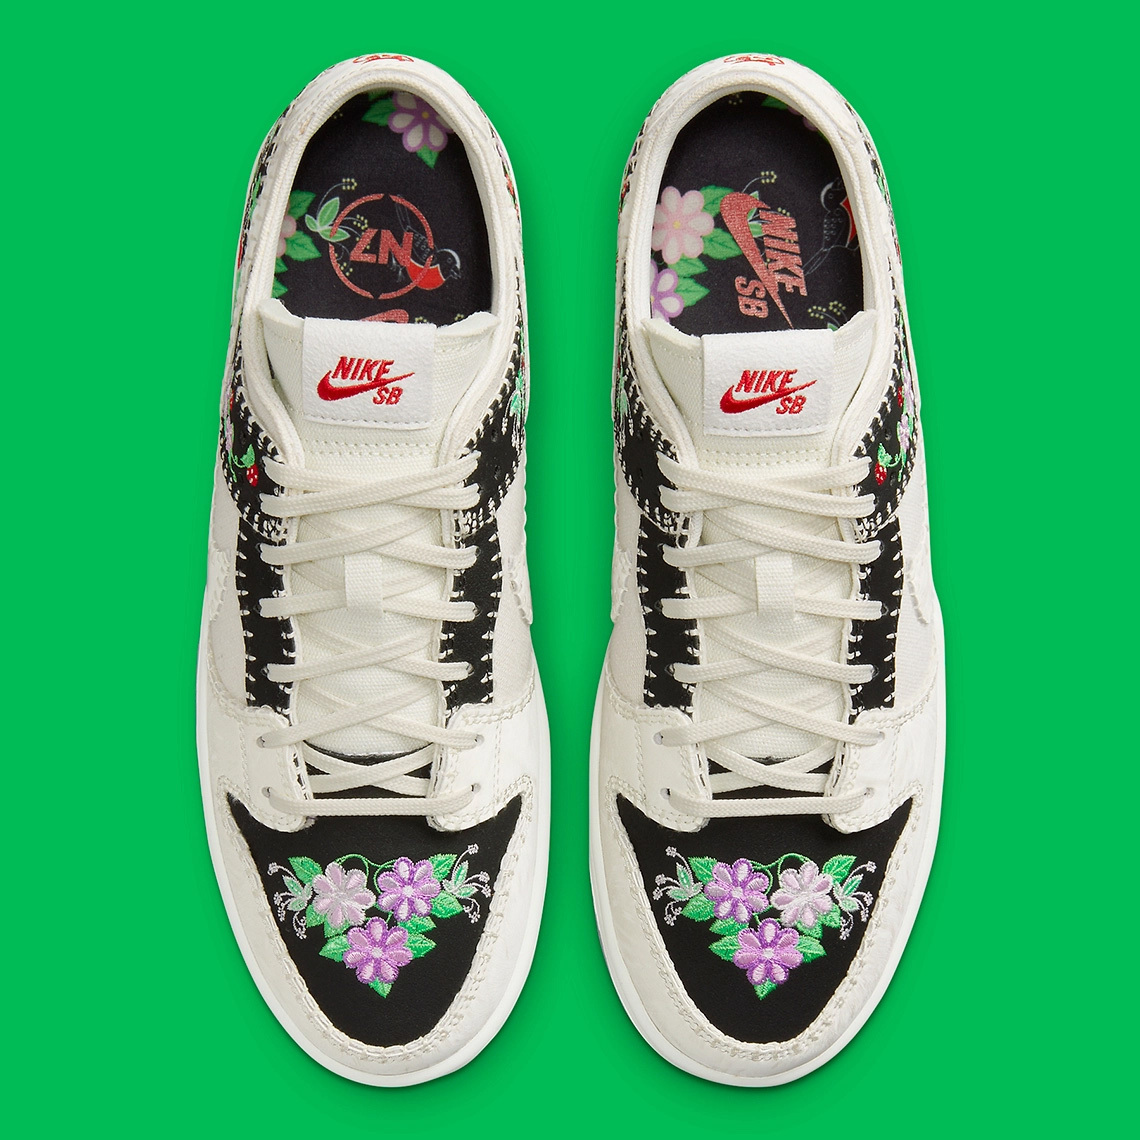 Nike N7 Collaboration with Nike SB: Exclusive Release of Dunk Low Pro ...